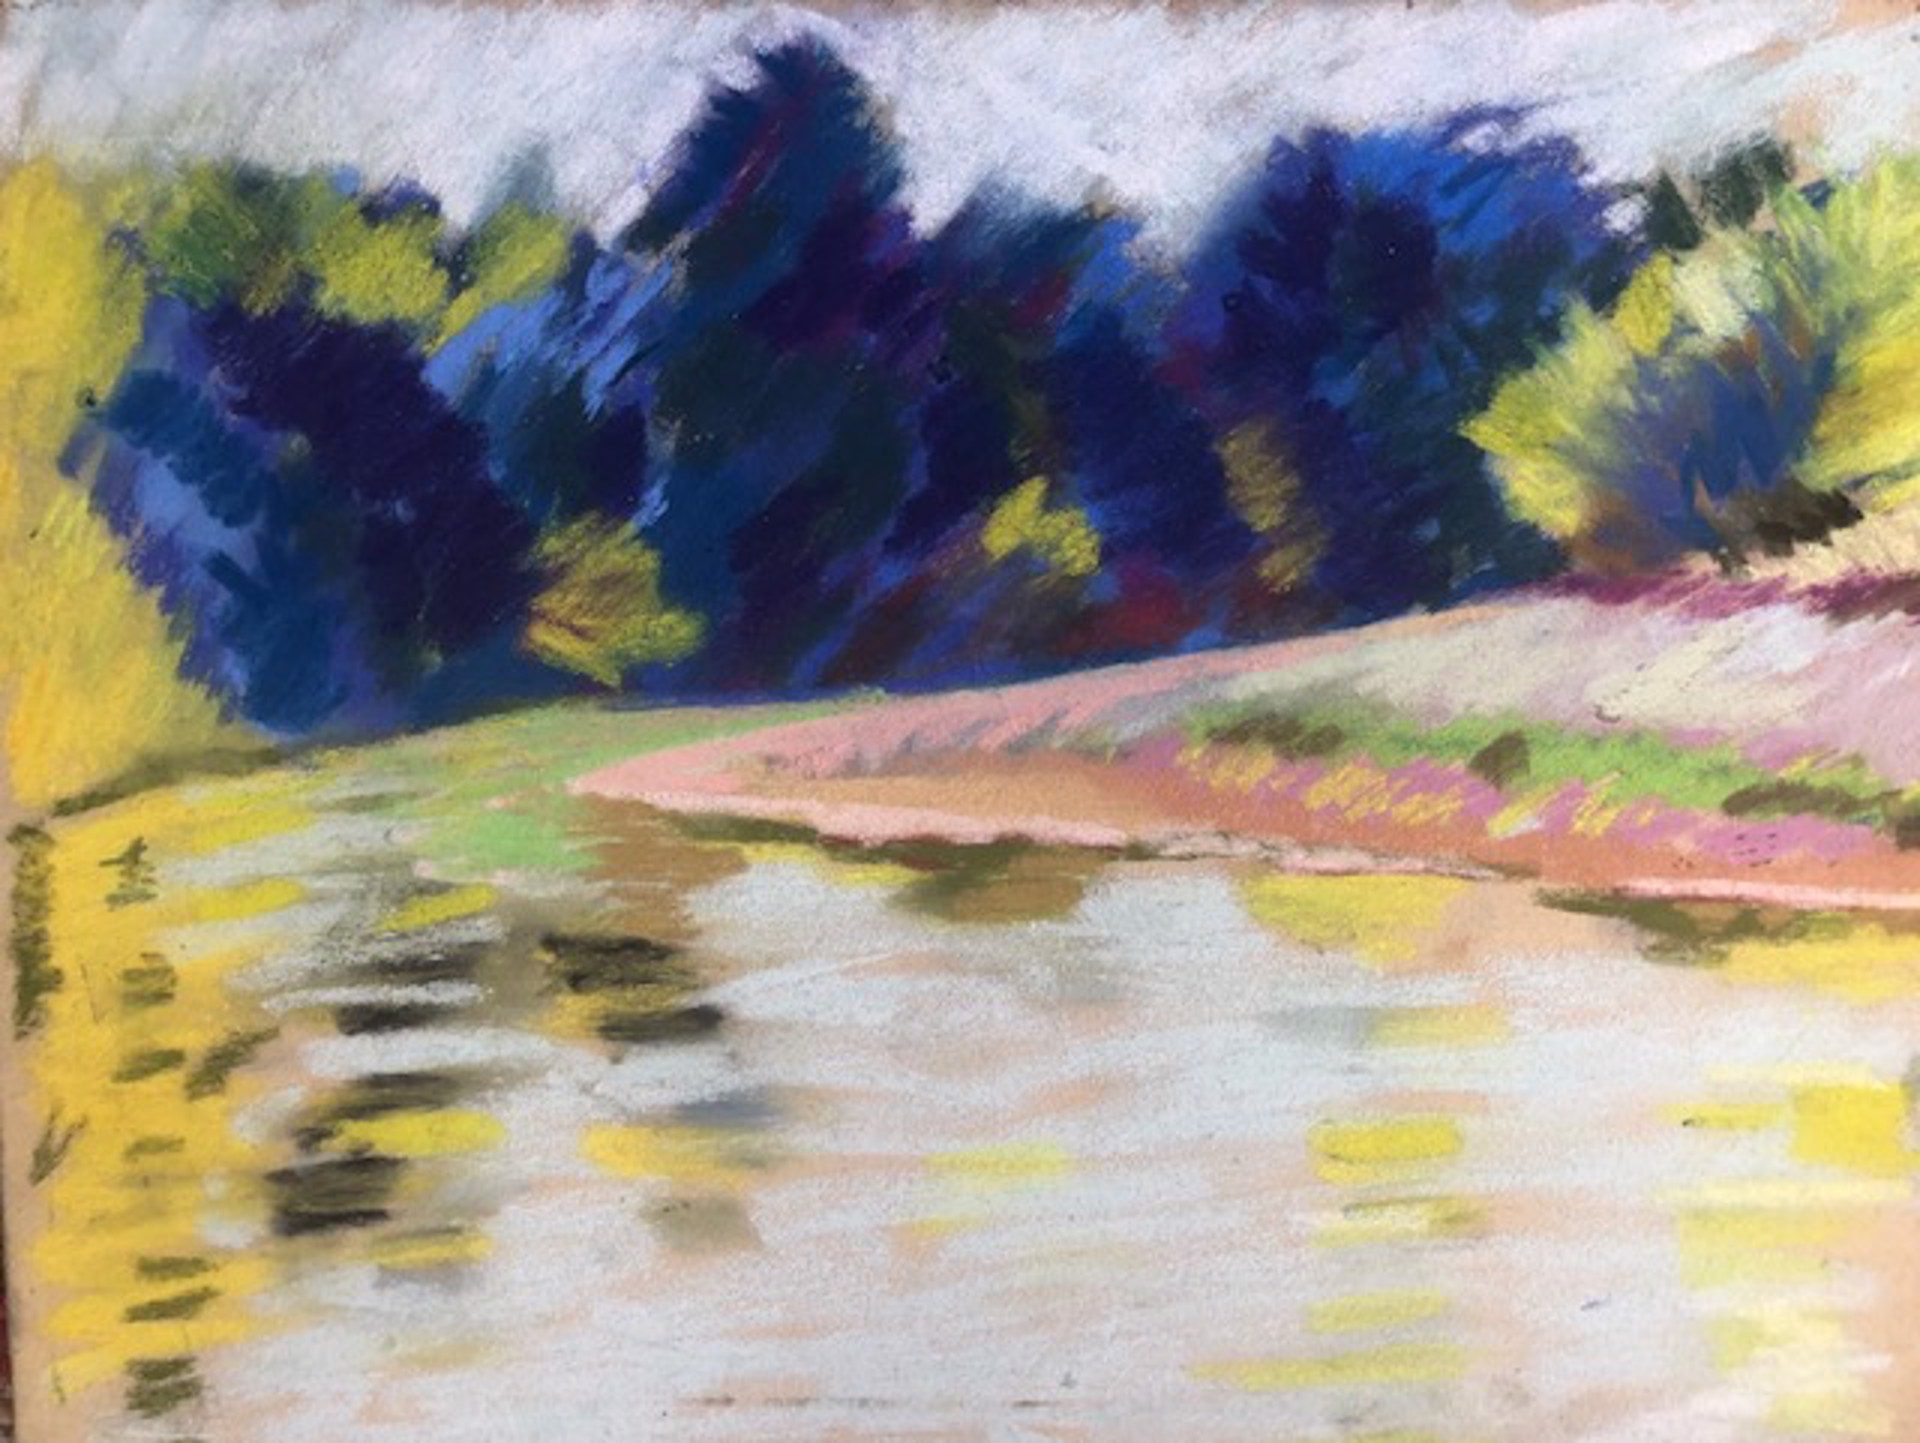 Amite River, Summer by Kate Trepagnier